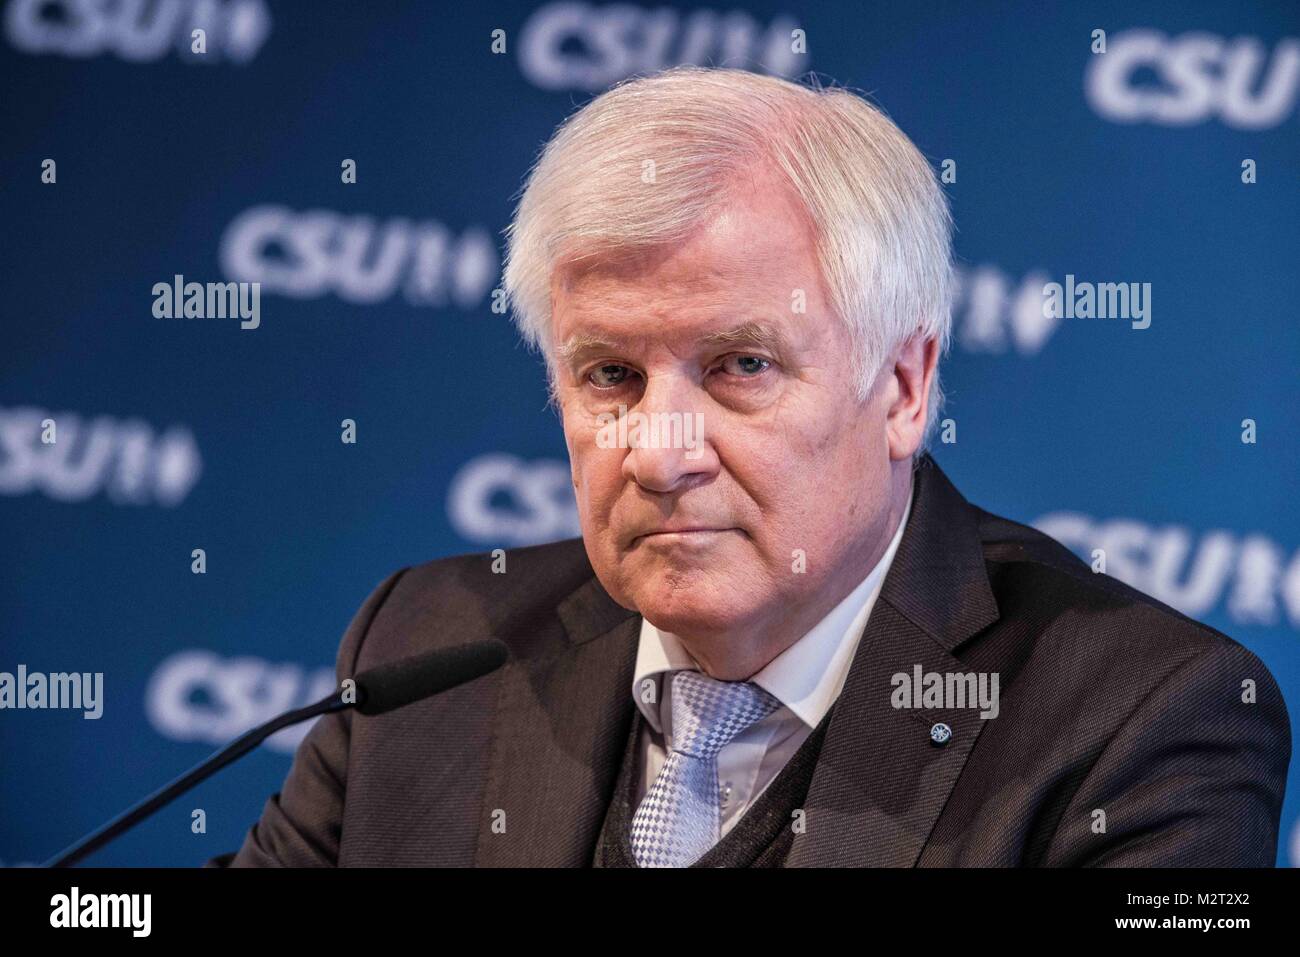 Munich, Bavaria, Germany. 8th Feb, 2018. Horst Seehofer, head of Angela MerkelÃ¢â‚¬â„¢s Bavarian sister party the CSU held a conference one day after a 177-page agreement between Angela Merkel and the SPD was made in order to create a viable government and avoid new elections. Germany has been operating without a functional government since the September 24th elections, which not only propelled the right-extremist AfD party to third-place nationally, but also led to the unprecedented downfall of Seehofer as Minister-President of Bavaria. The CSU has been a holdout on themes such as limi Stock Photo